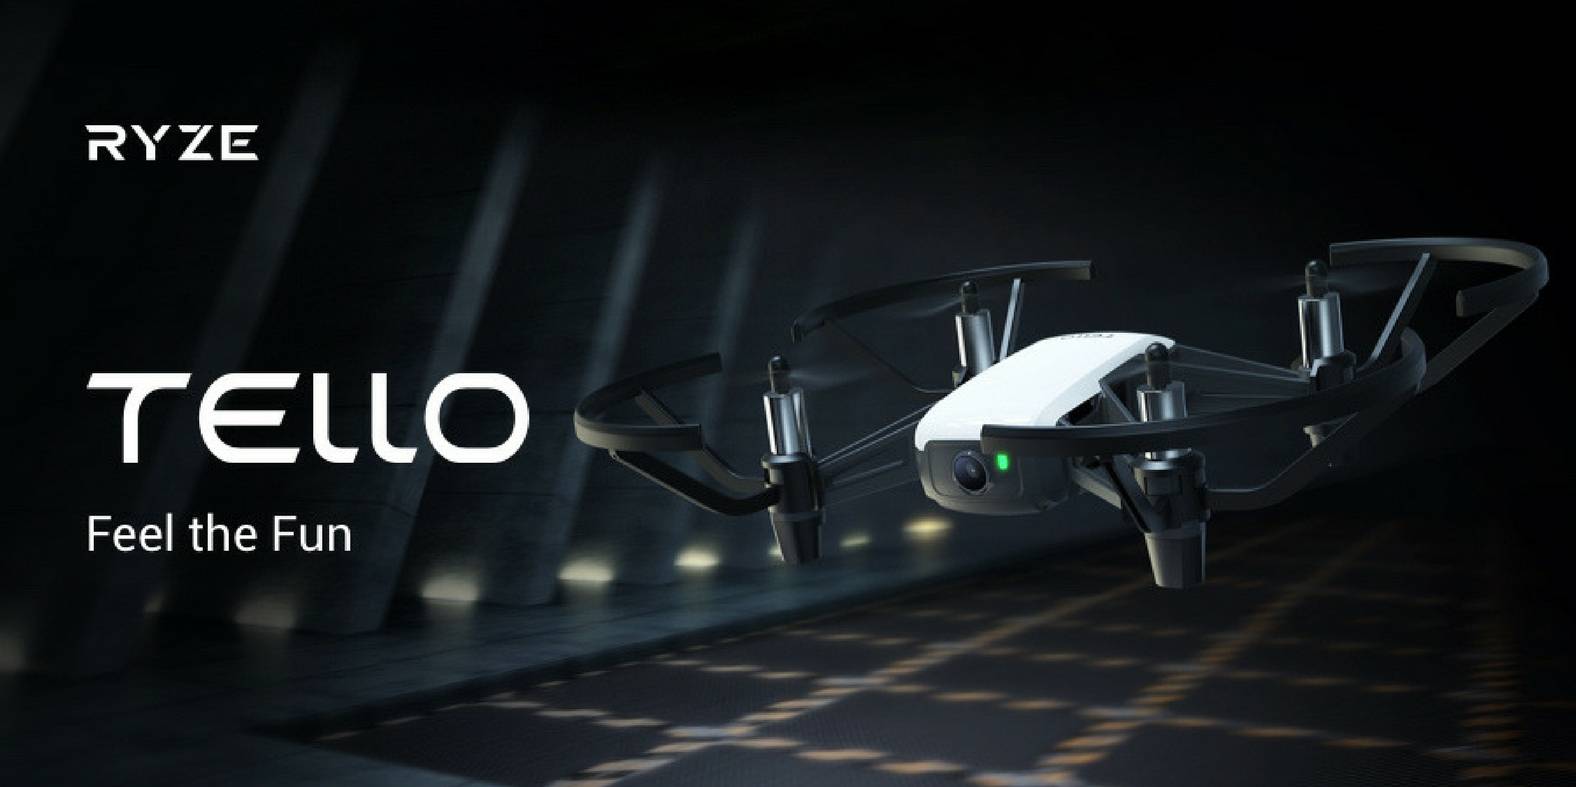 Ryze Tello Review: The Most Innovative Toy Drone Yet